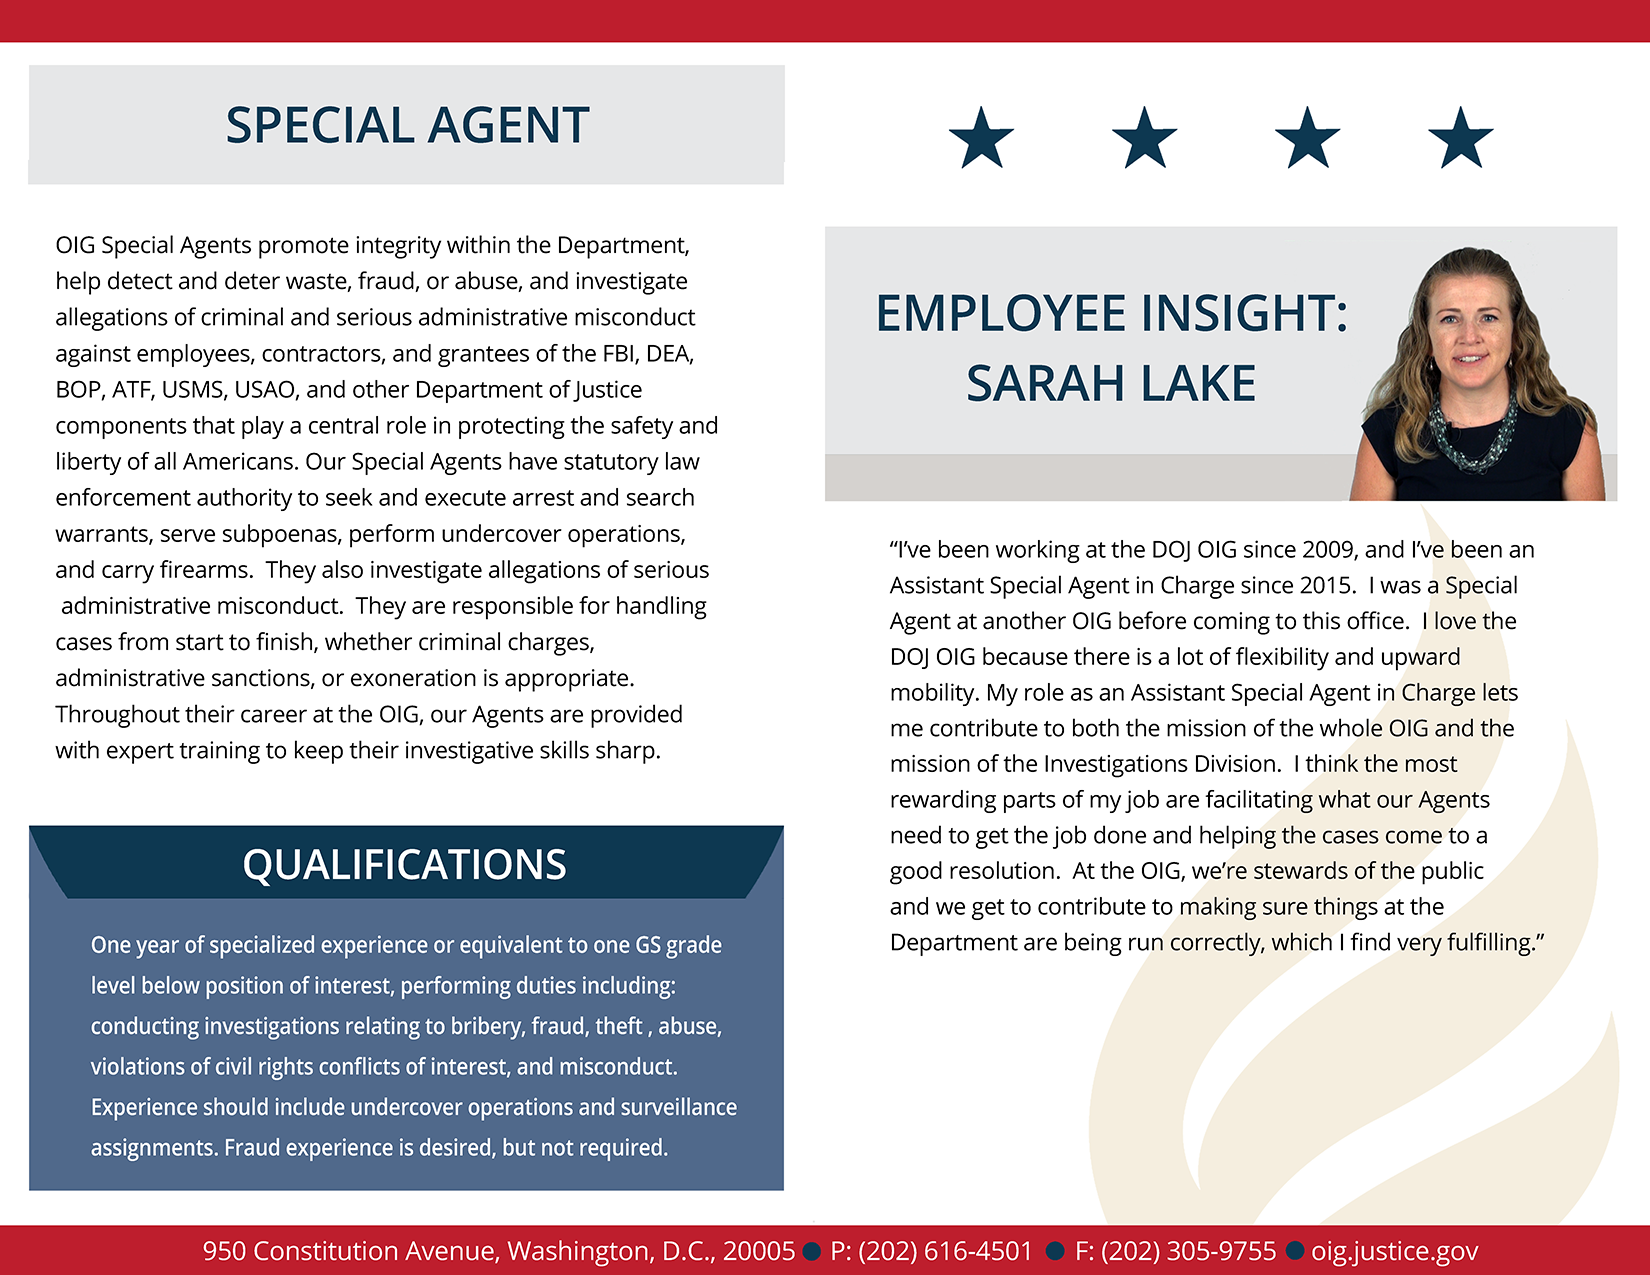 Learn more about the special agent employee experience